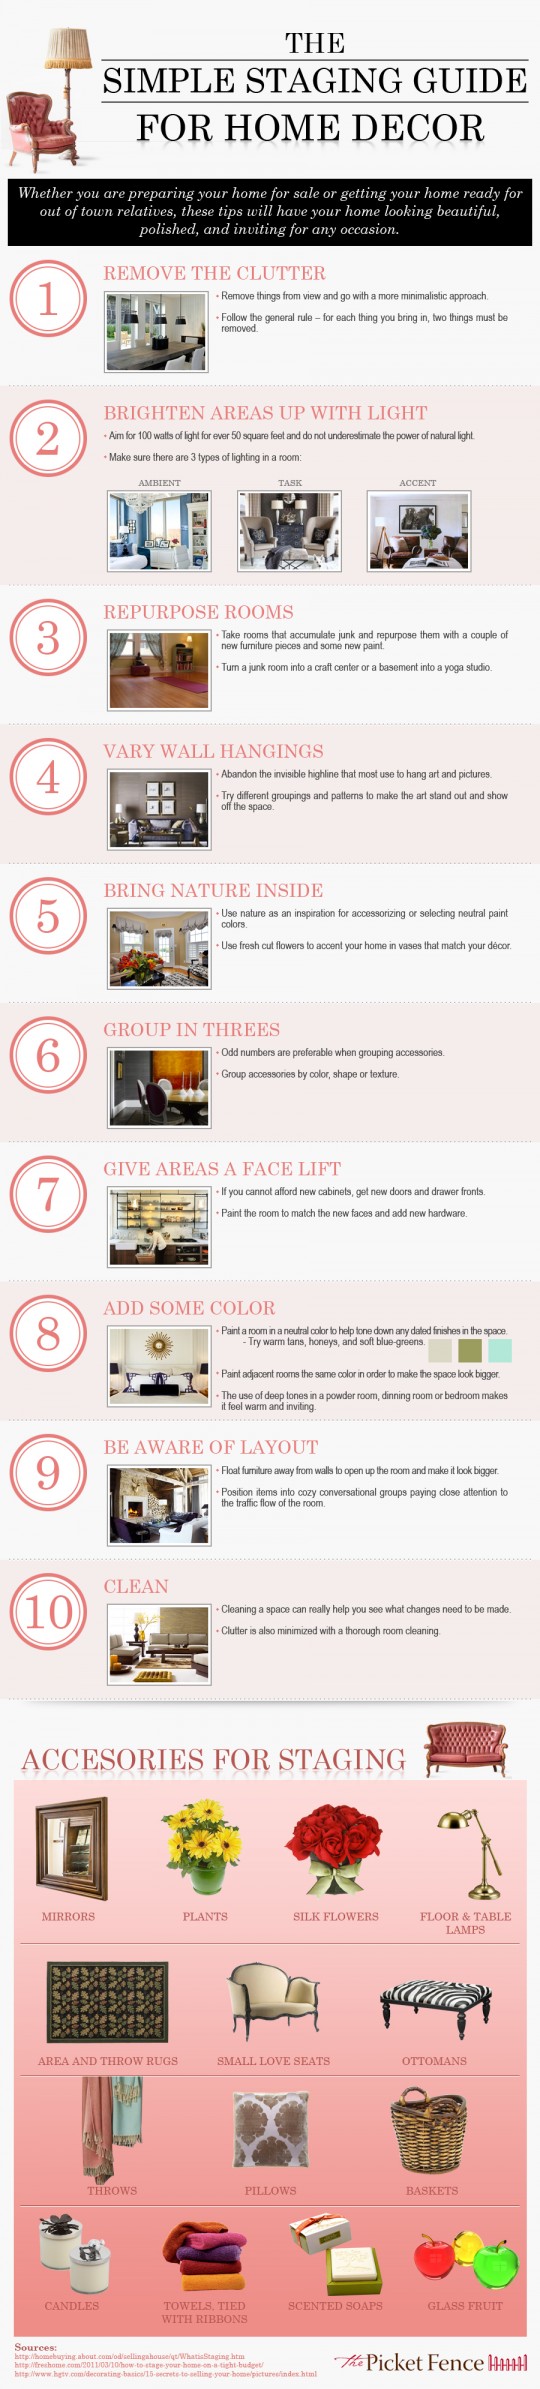 The Simple Staging Guide for Home Decor